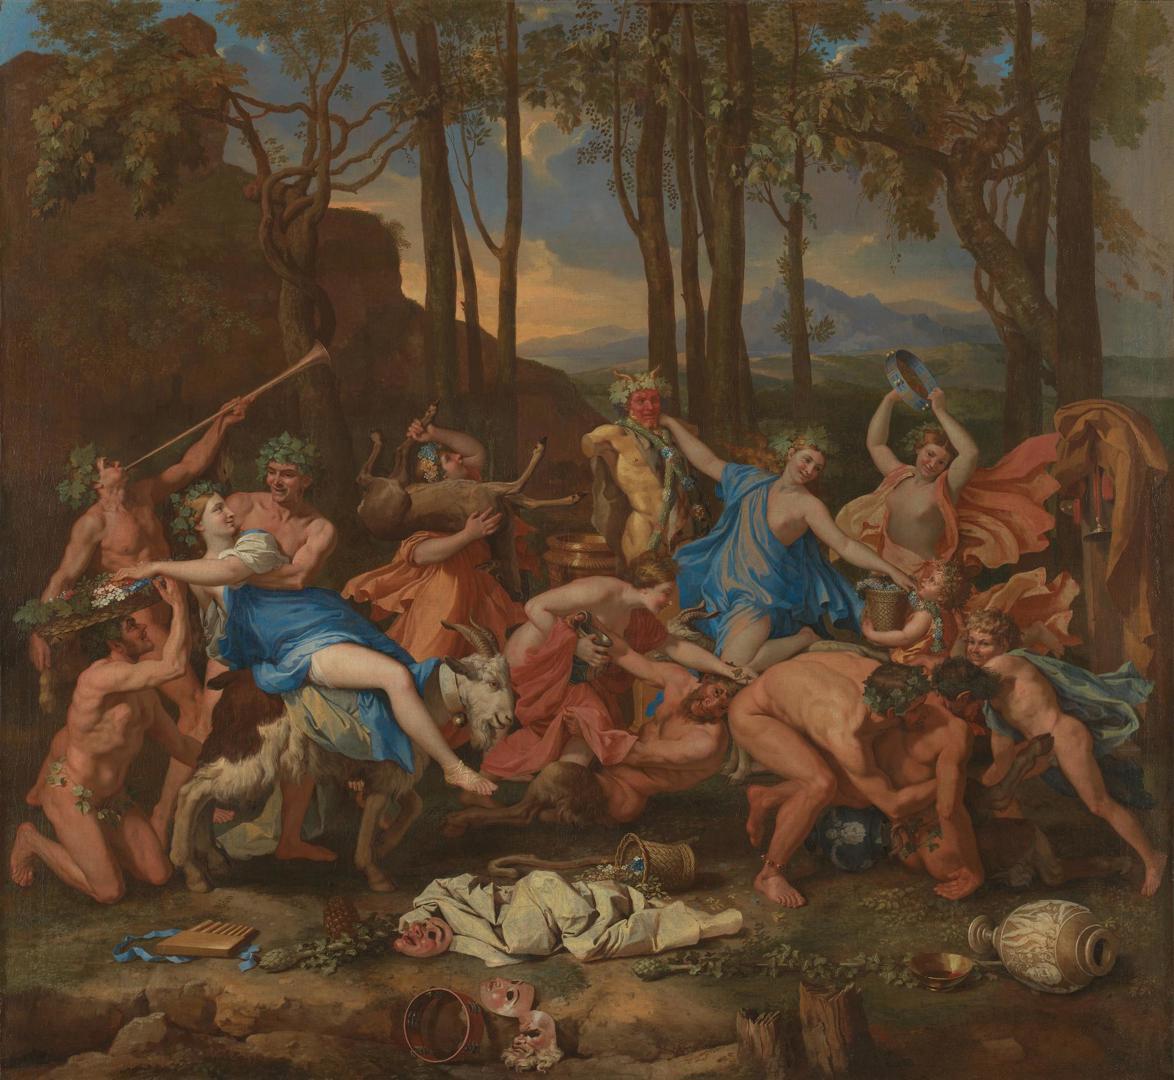 The Triumph of Pan by Nicolas Poussin